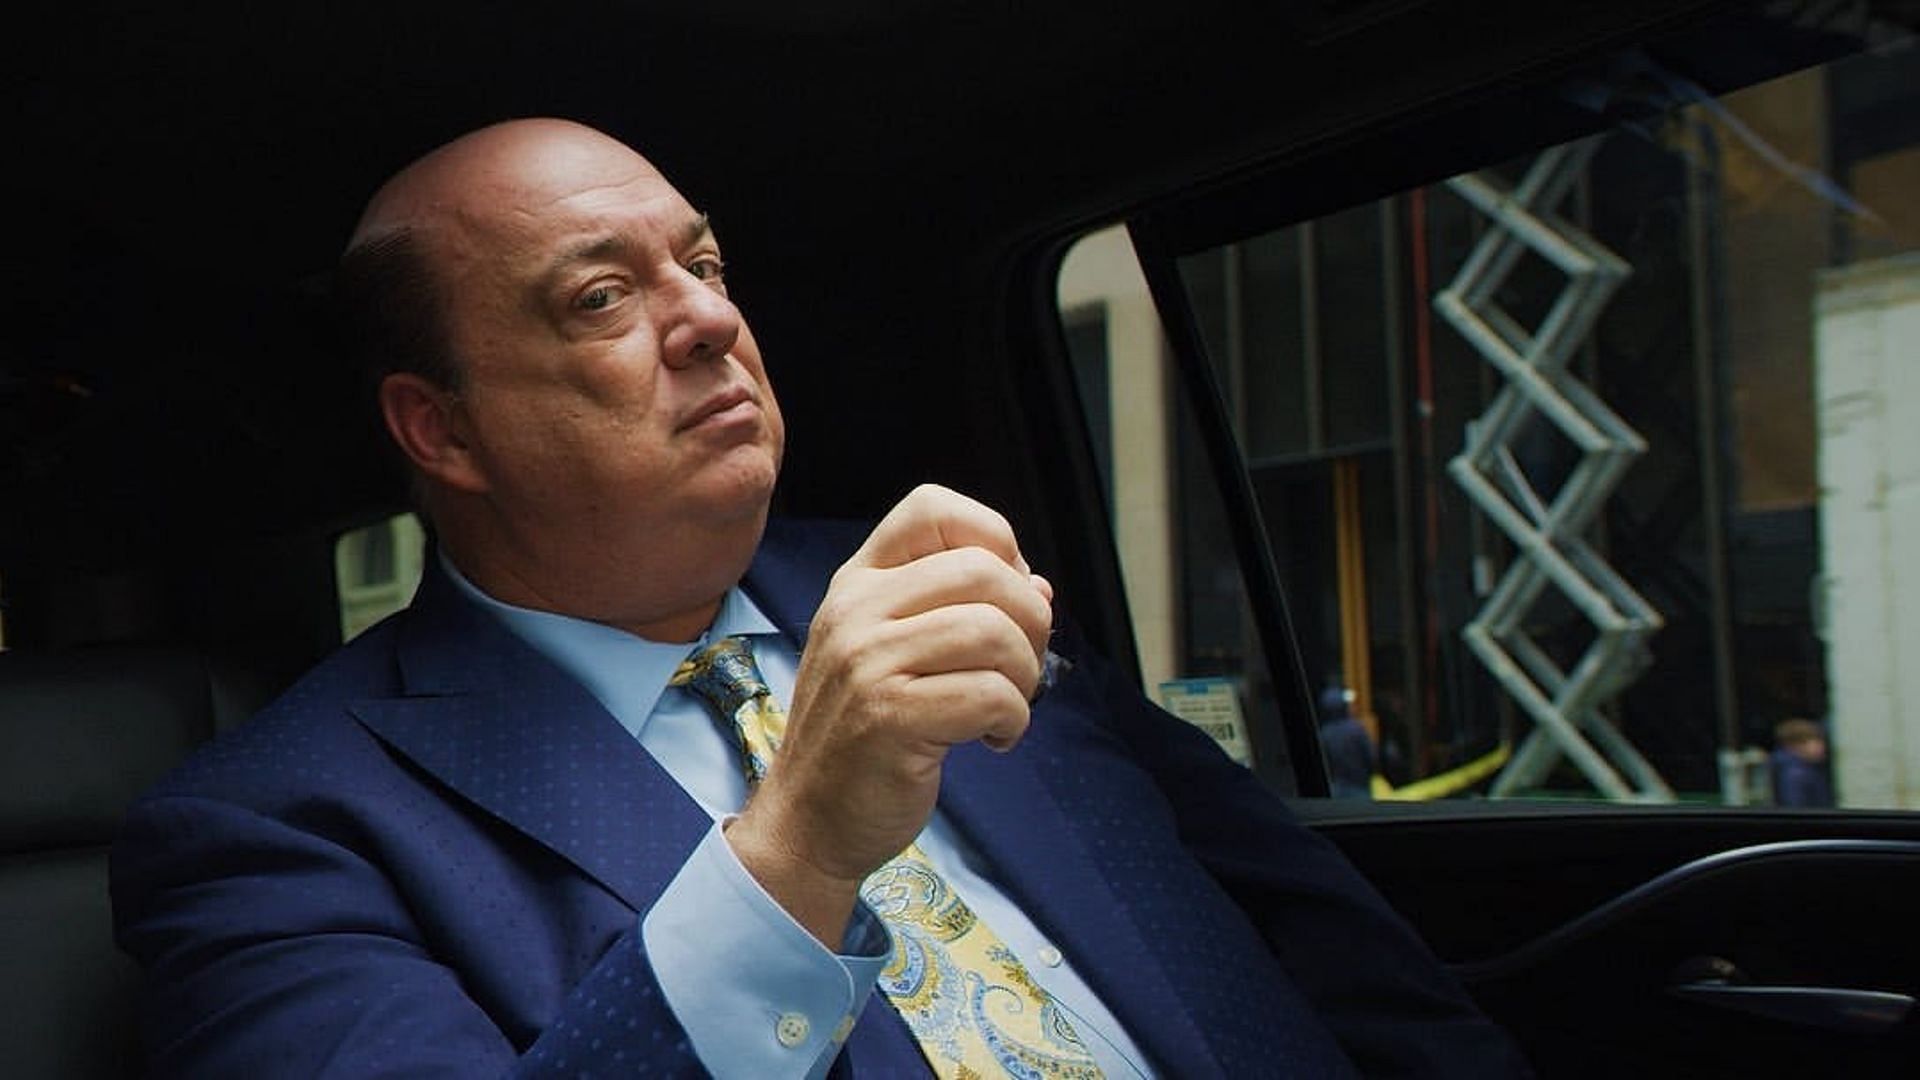 Paul Heyman is the counsel of The Bloodline